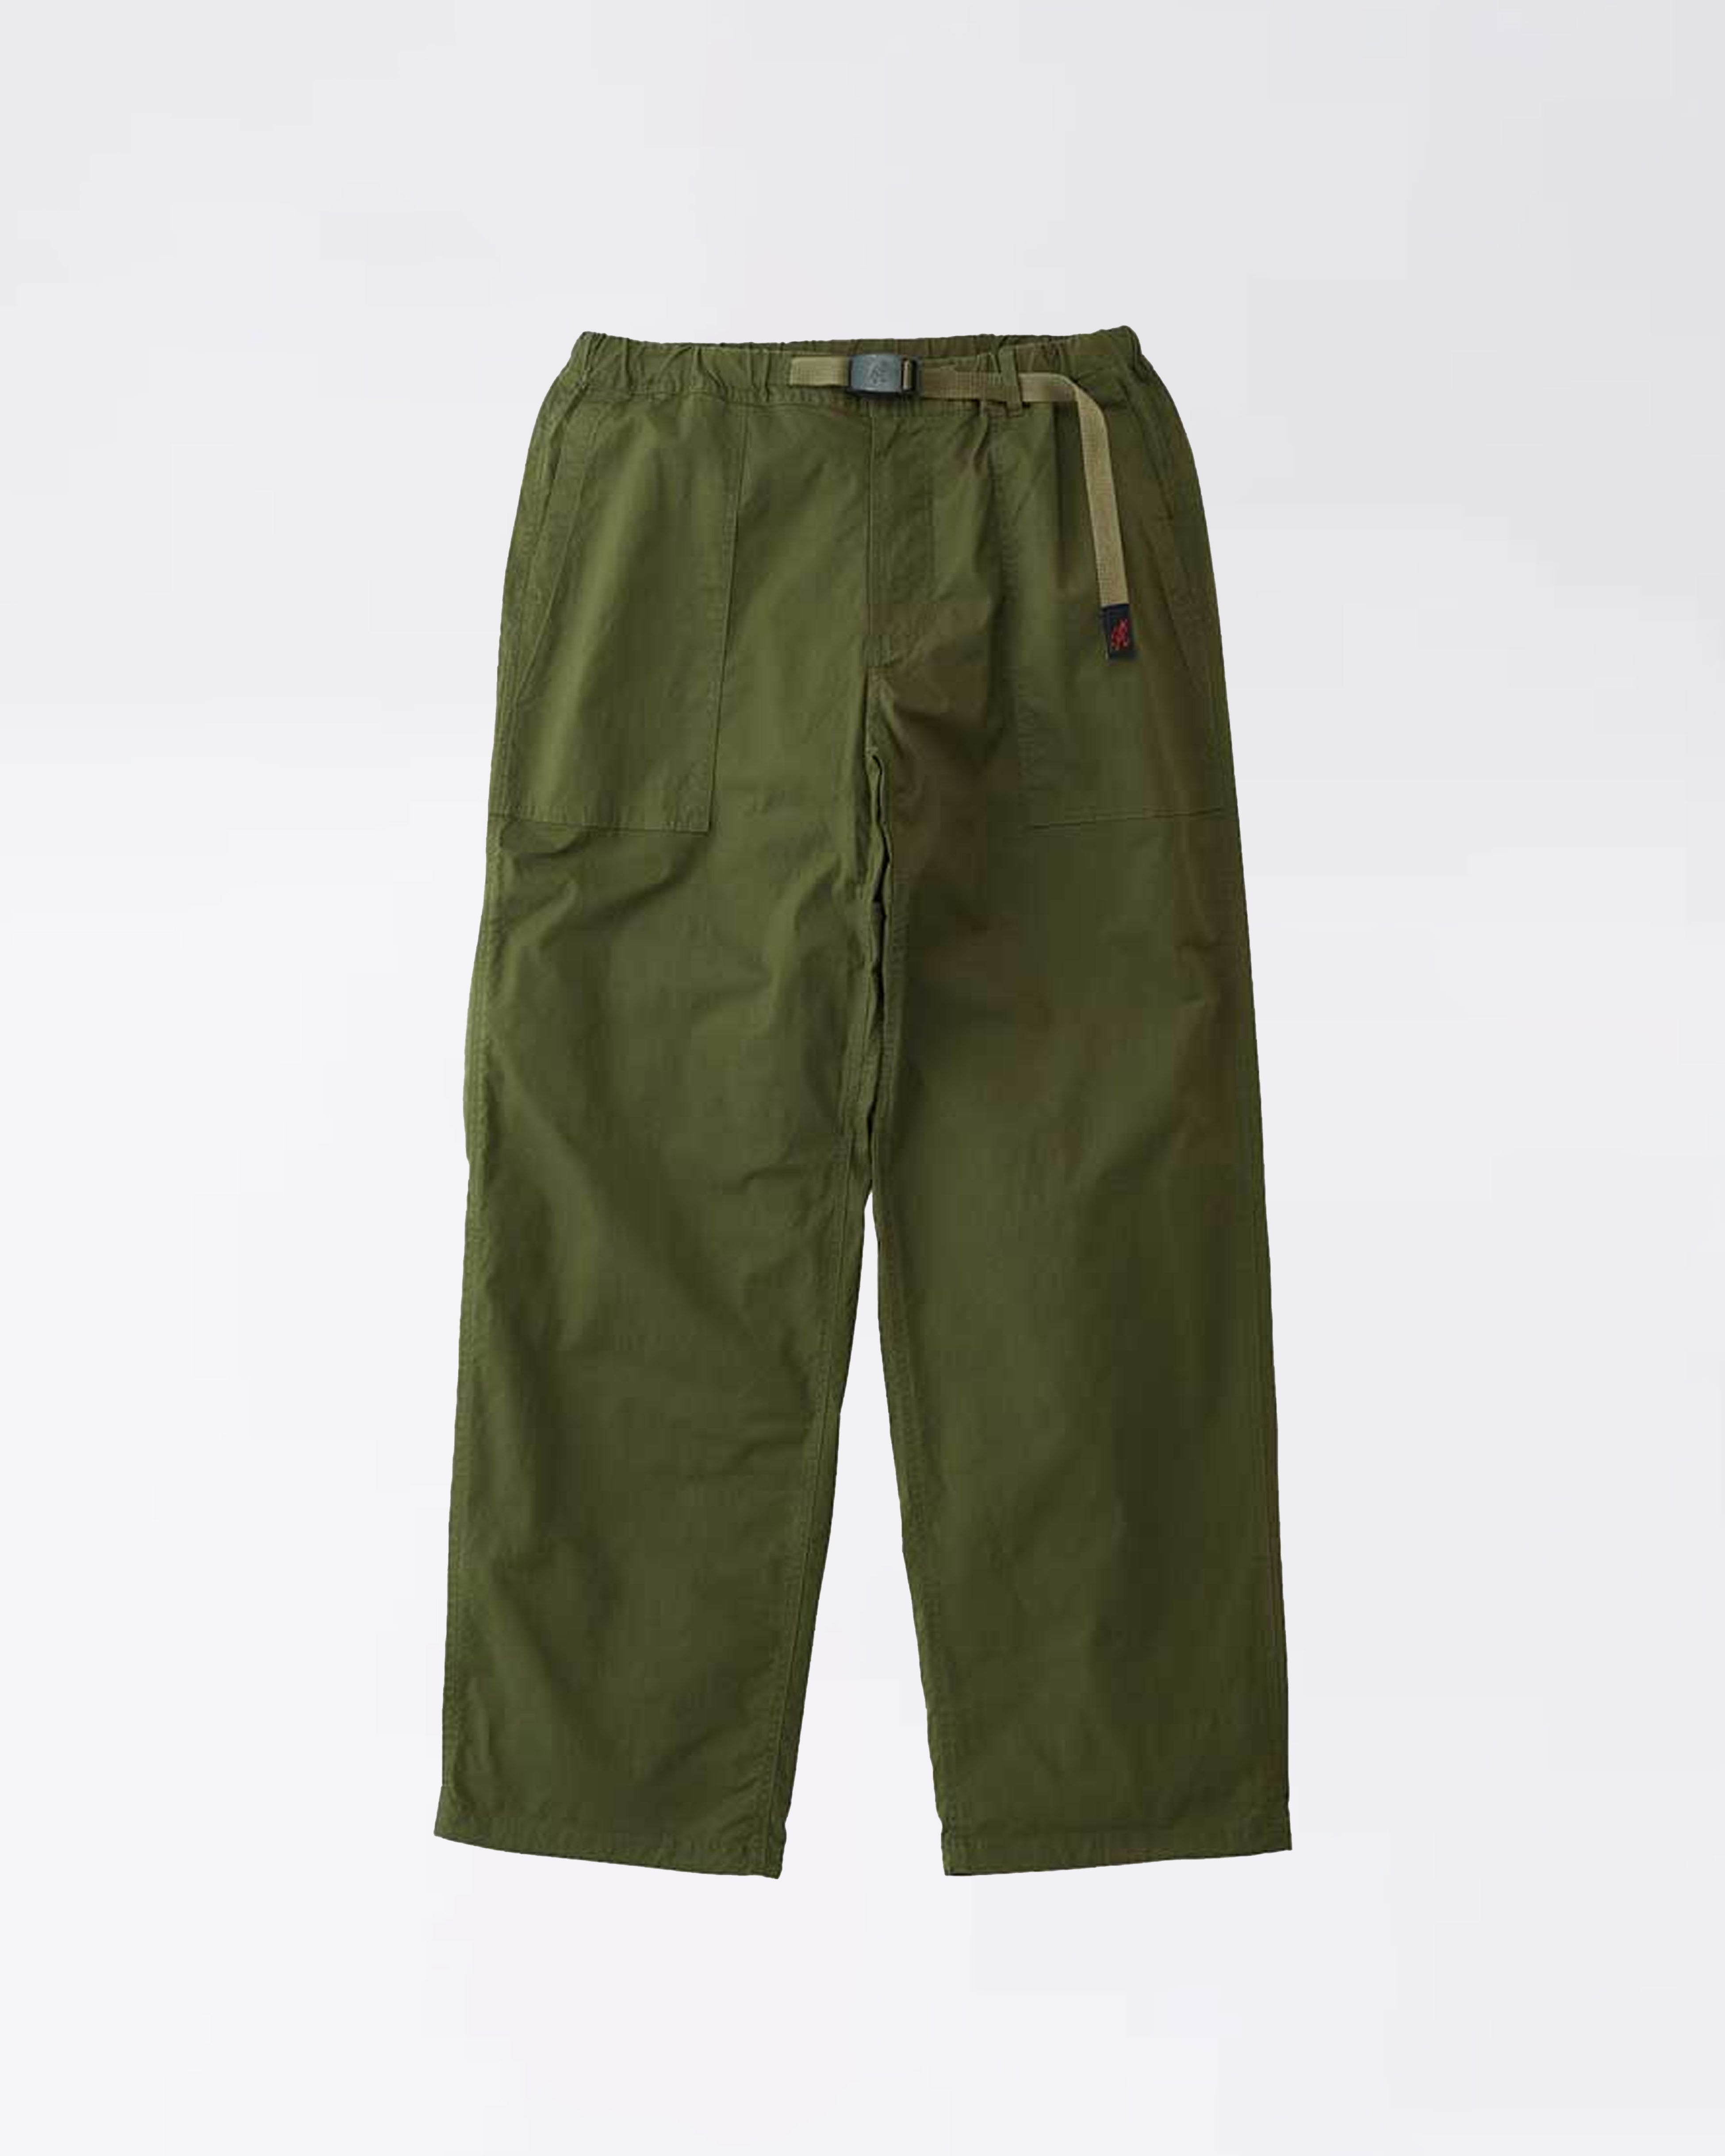 WEATHER FATIGUE PANT OLIVE